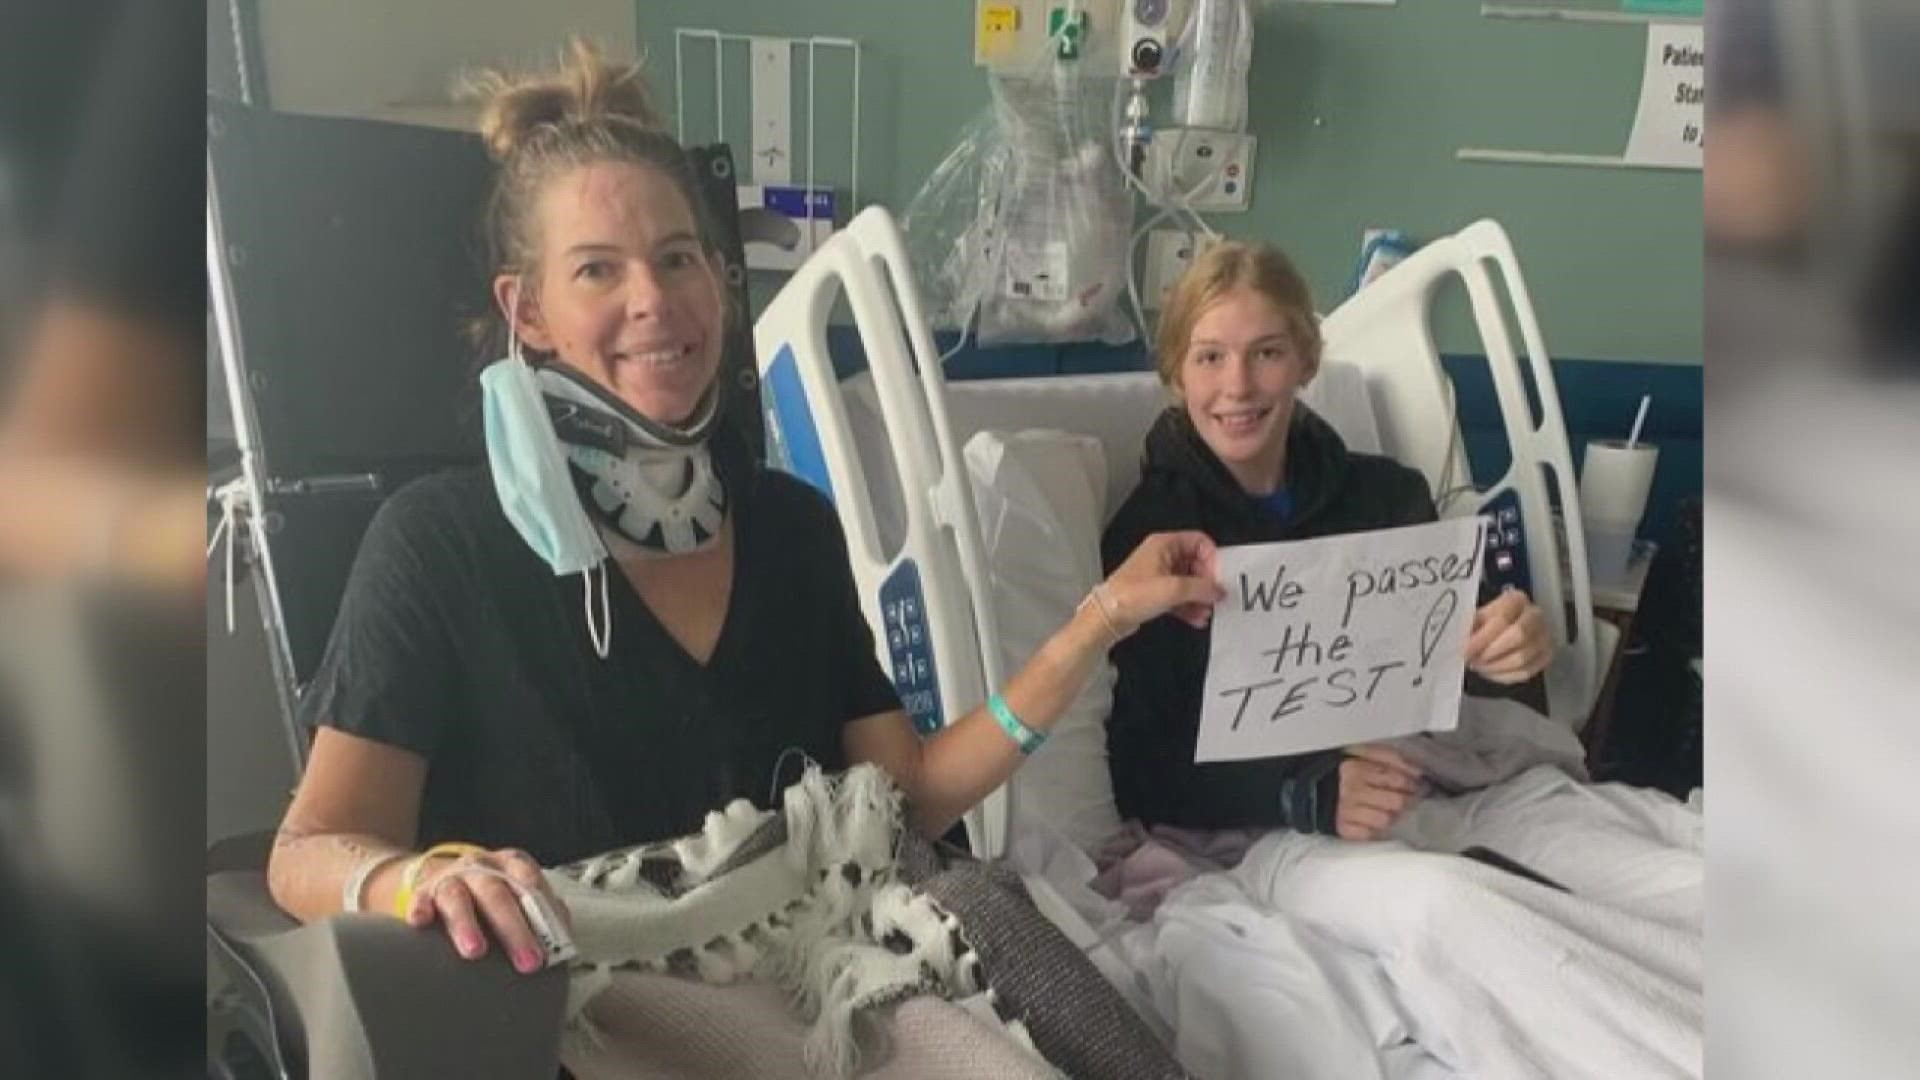 The road to recovery continues for Ava and Amy Jones, a month after they were hit in downtown Louisville.